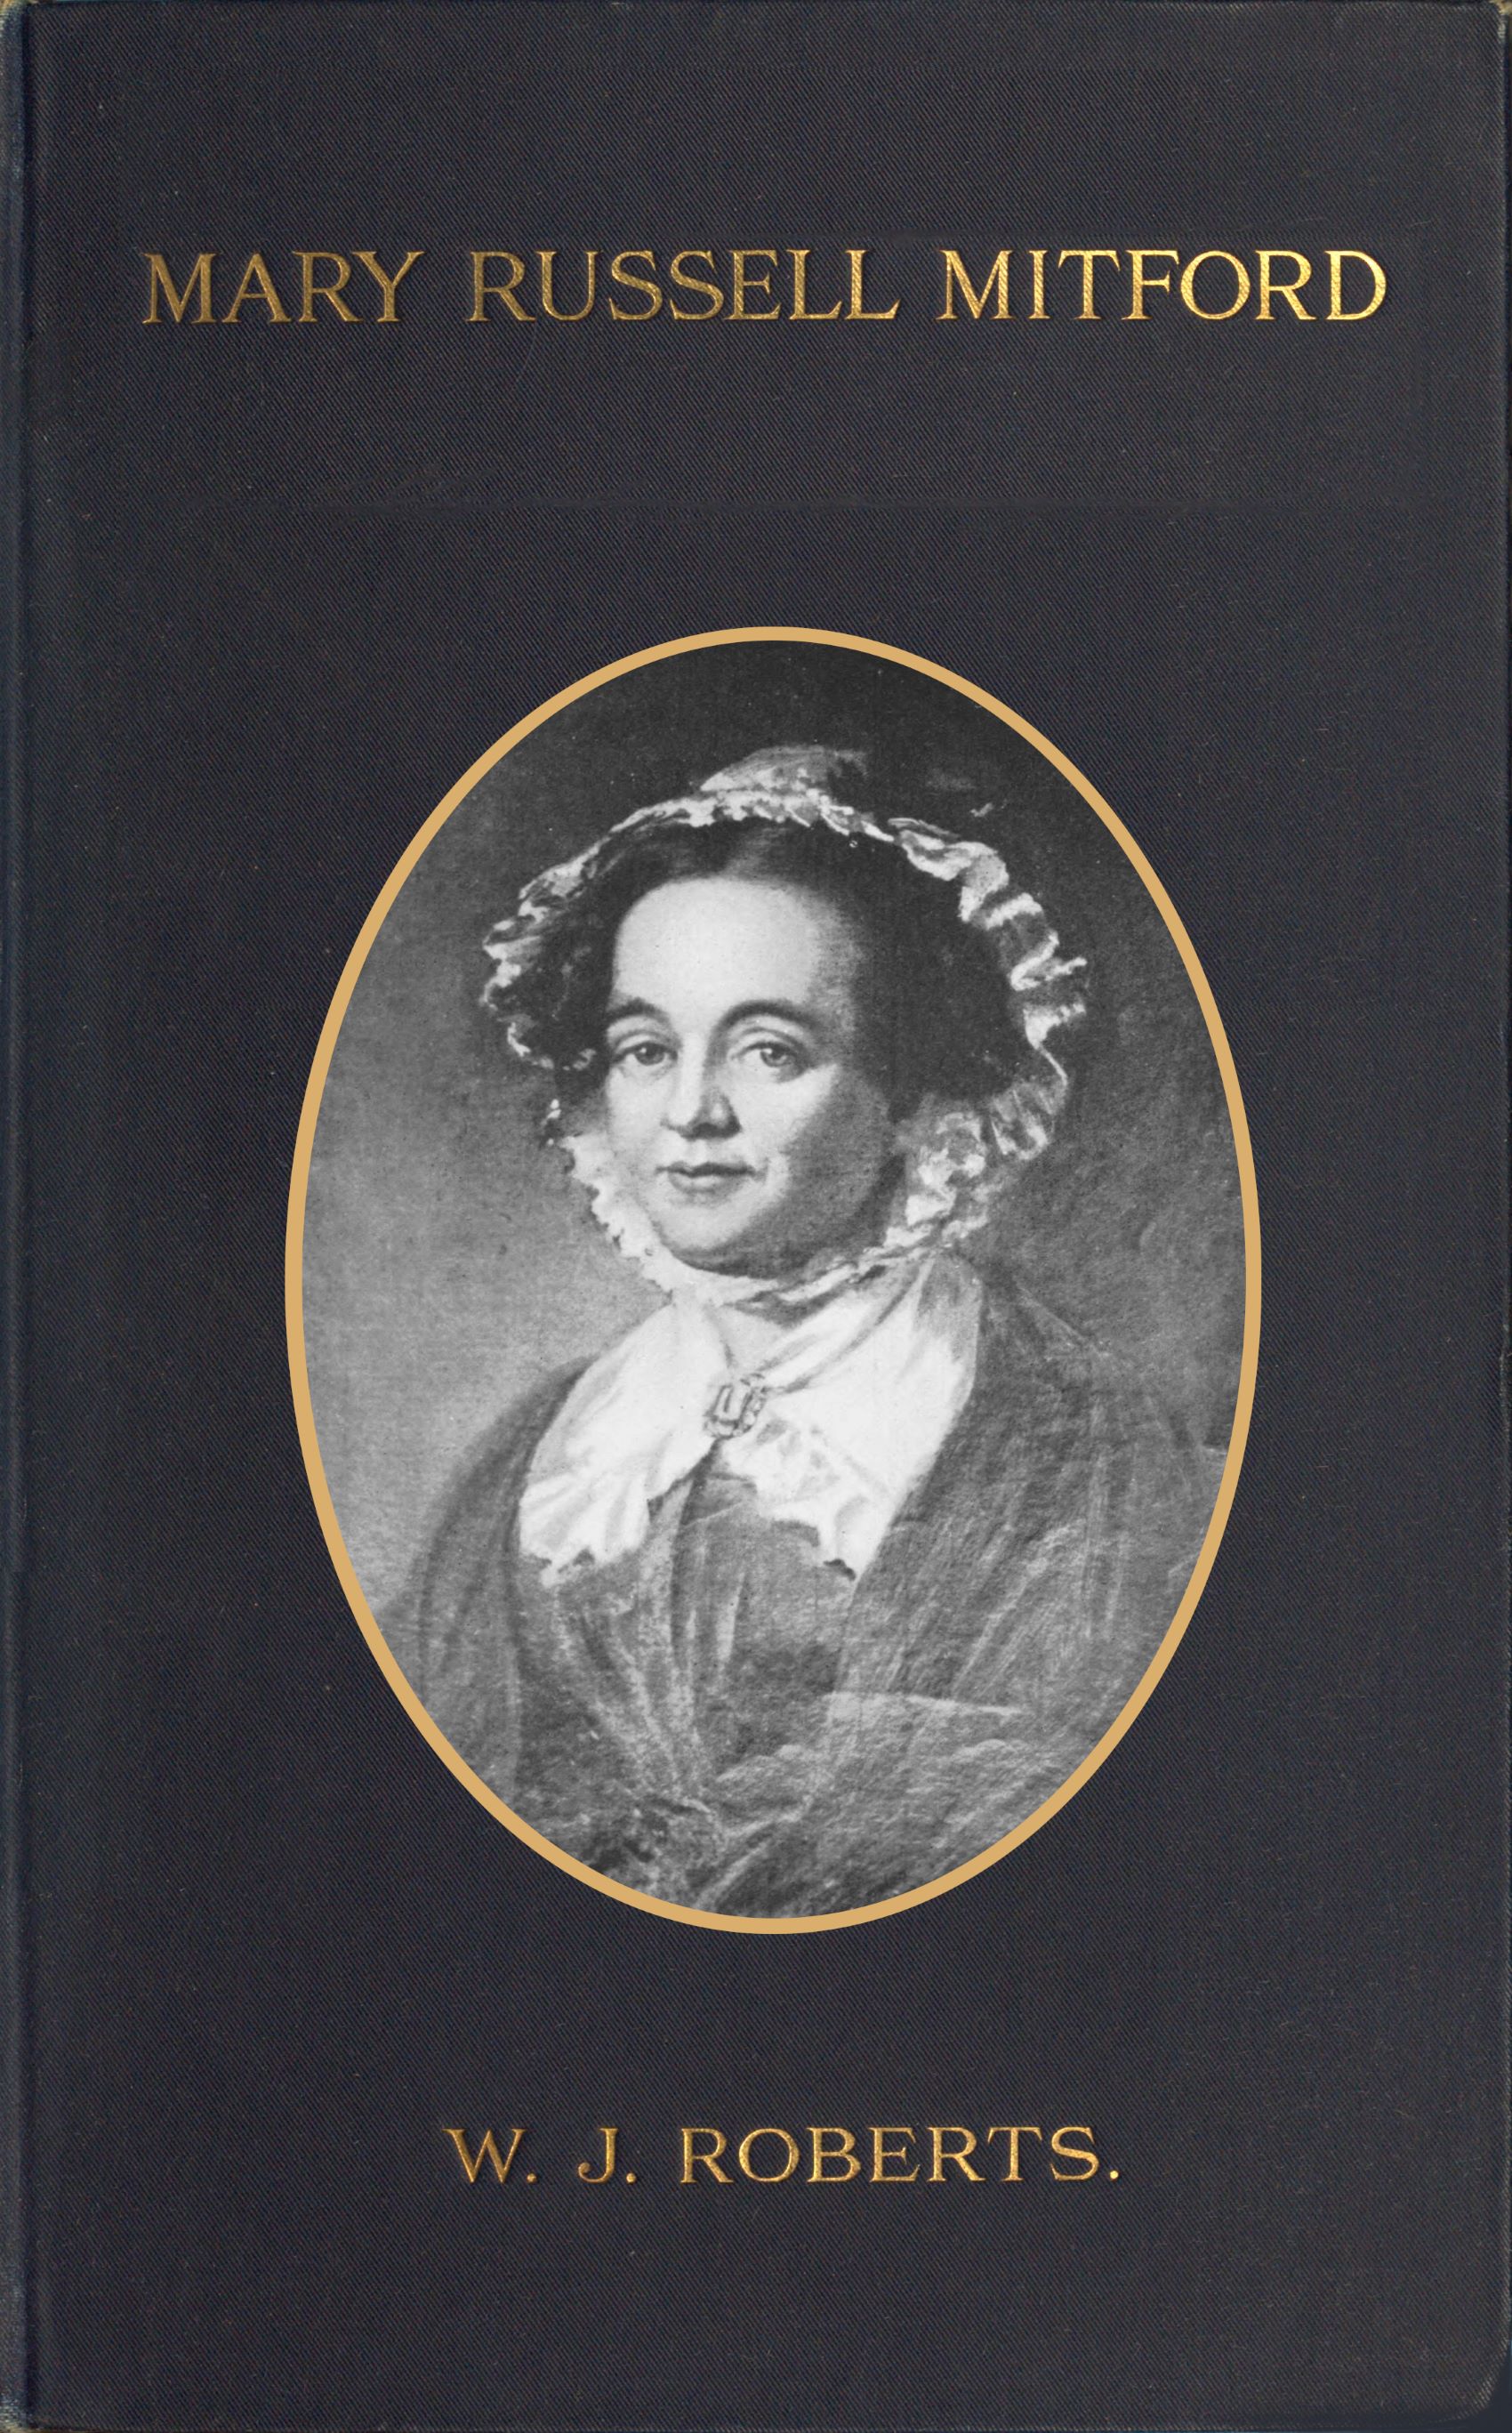 MARY RUSSELL MITFORD The Tragedy of a Blue Stocking | Project